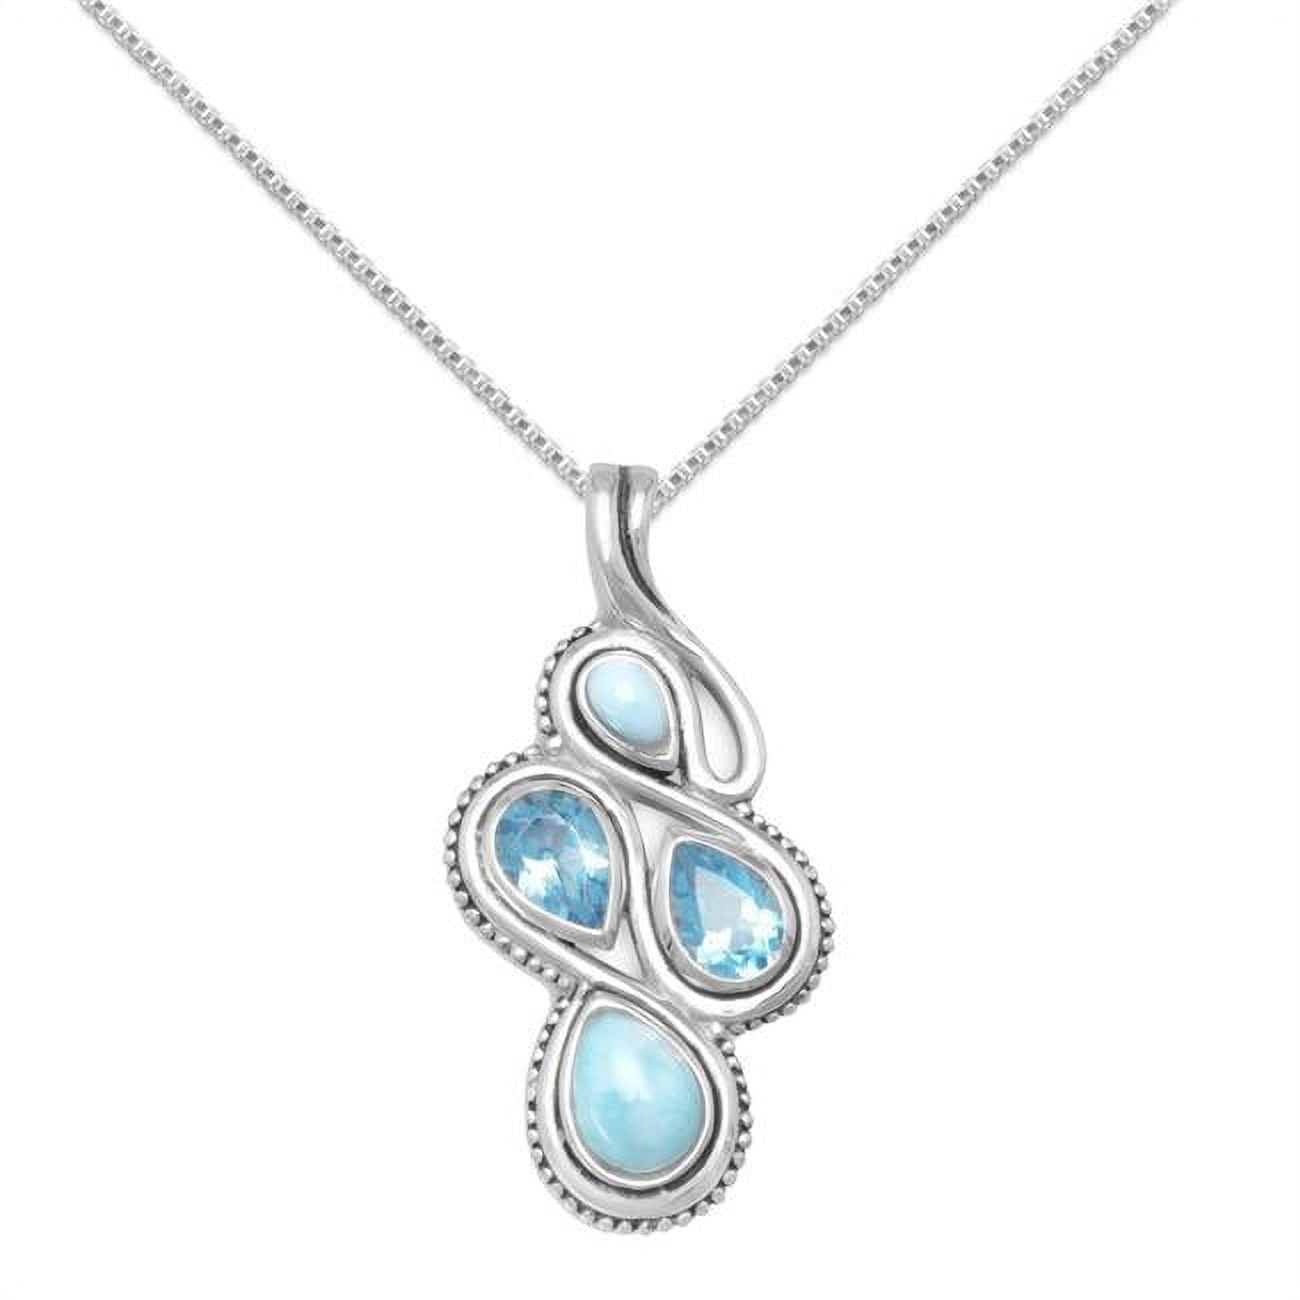 74279-22 22 In. Oxidized Sterling Silver Blue Topaz & Larimar Figure 8 Slide Pendant With 1.5 Mm Box Chain